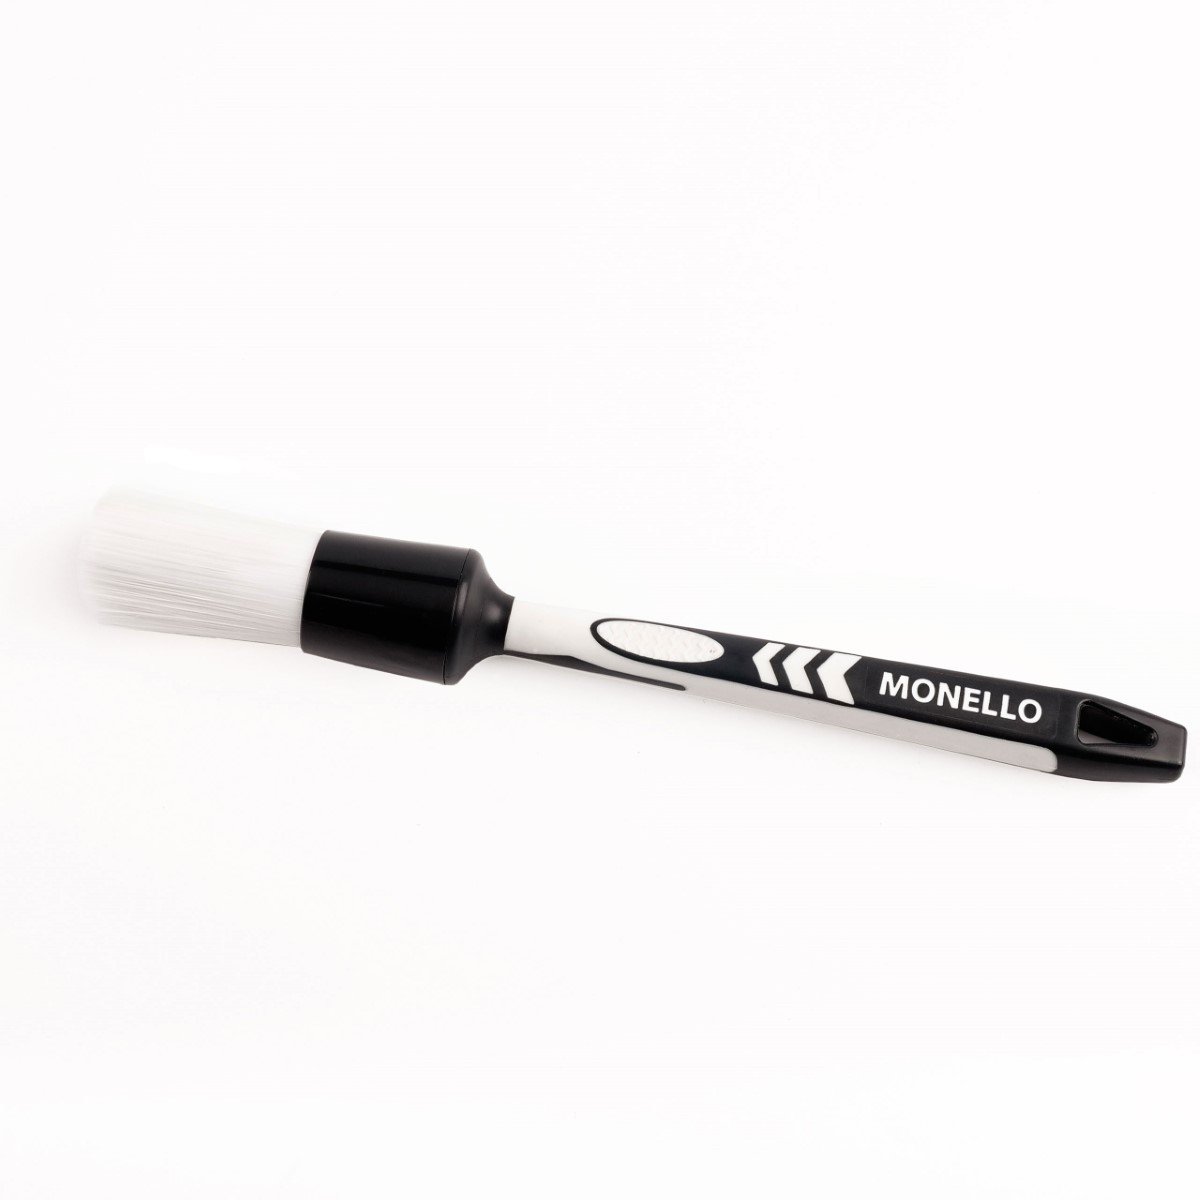 Pennello Bianco Soft Detailing Brush - 24mm